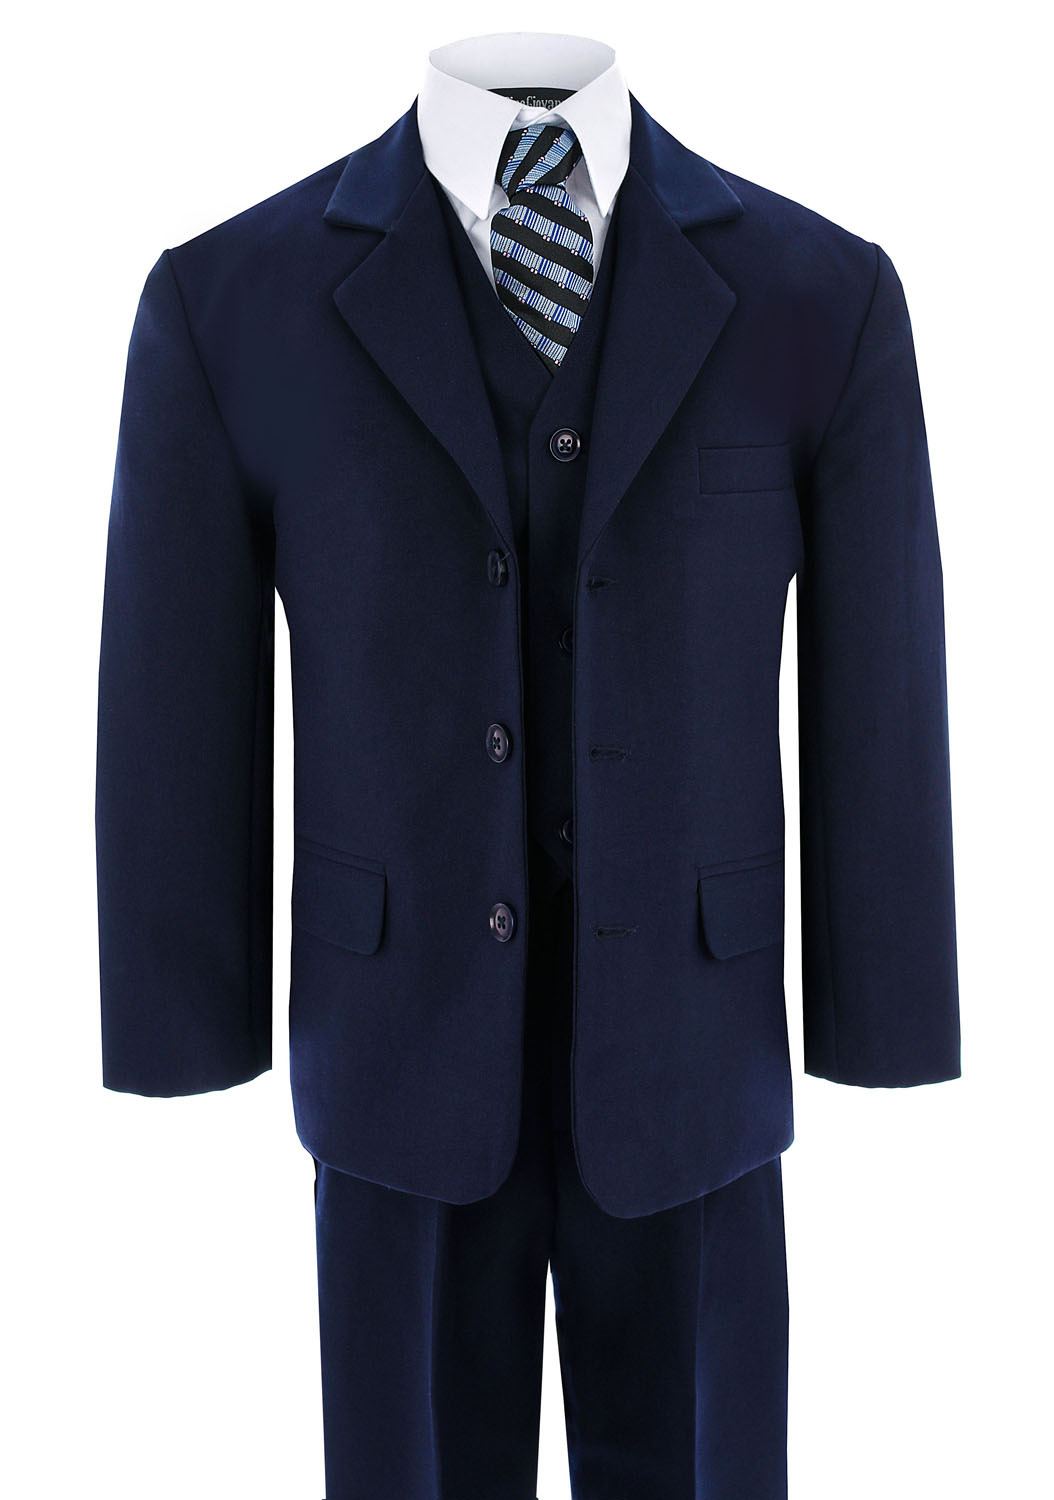 Gino Giovanni Formal Boy Navy Blue Suit From Baby to Teen